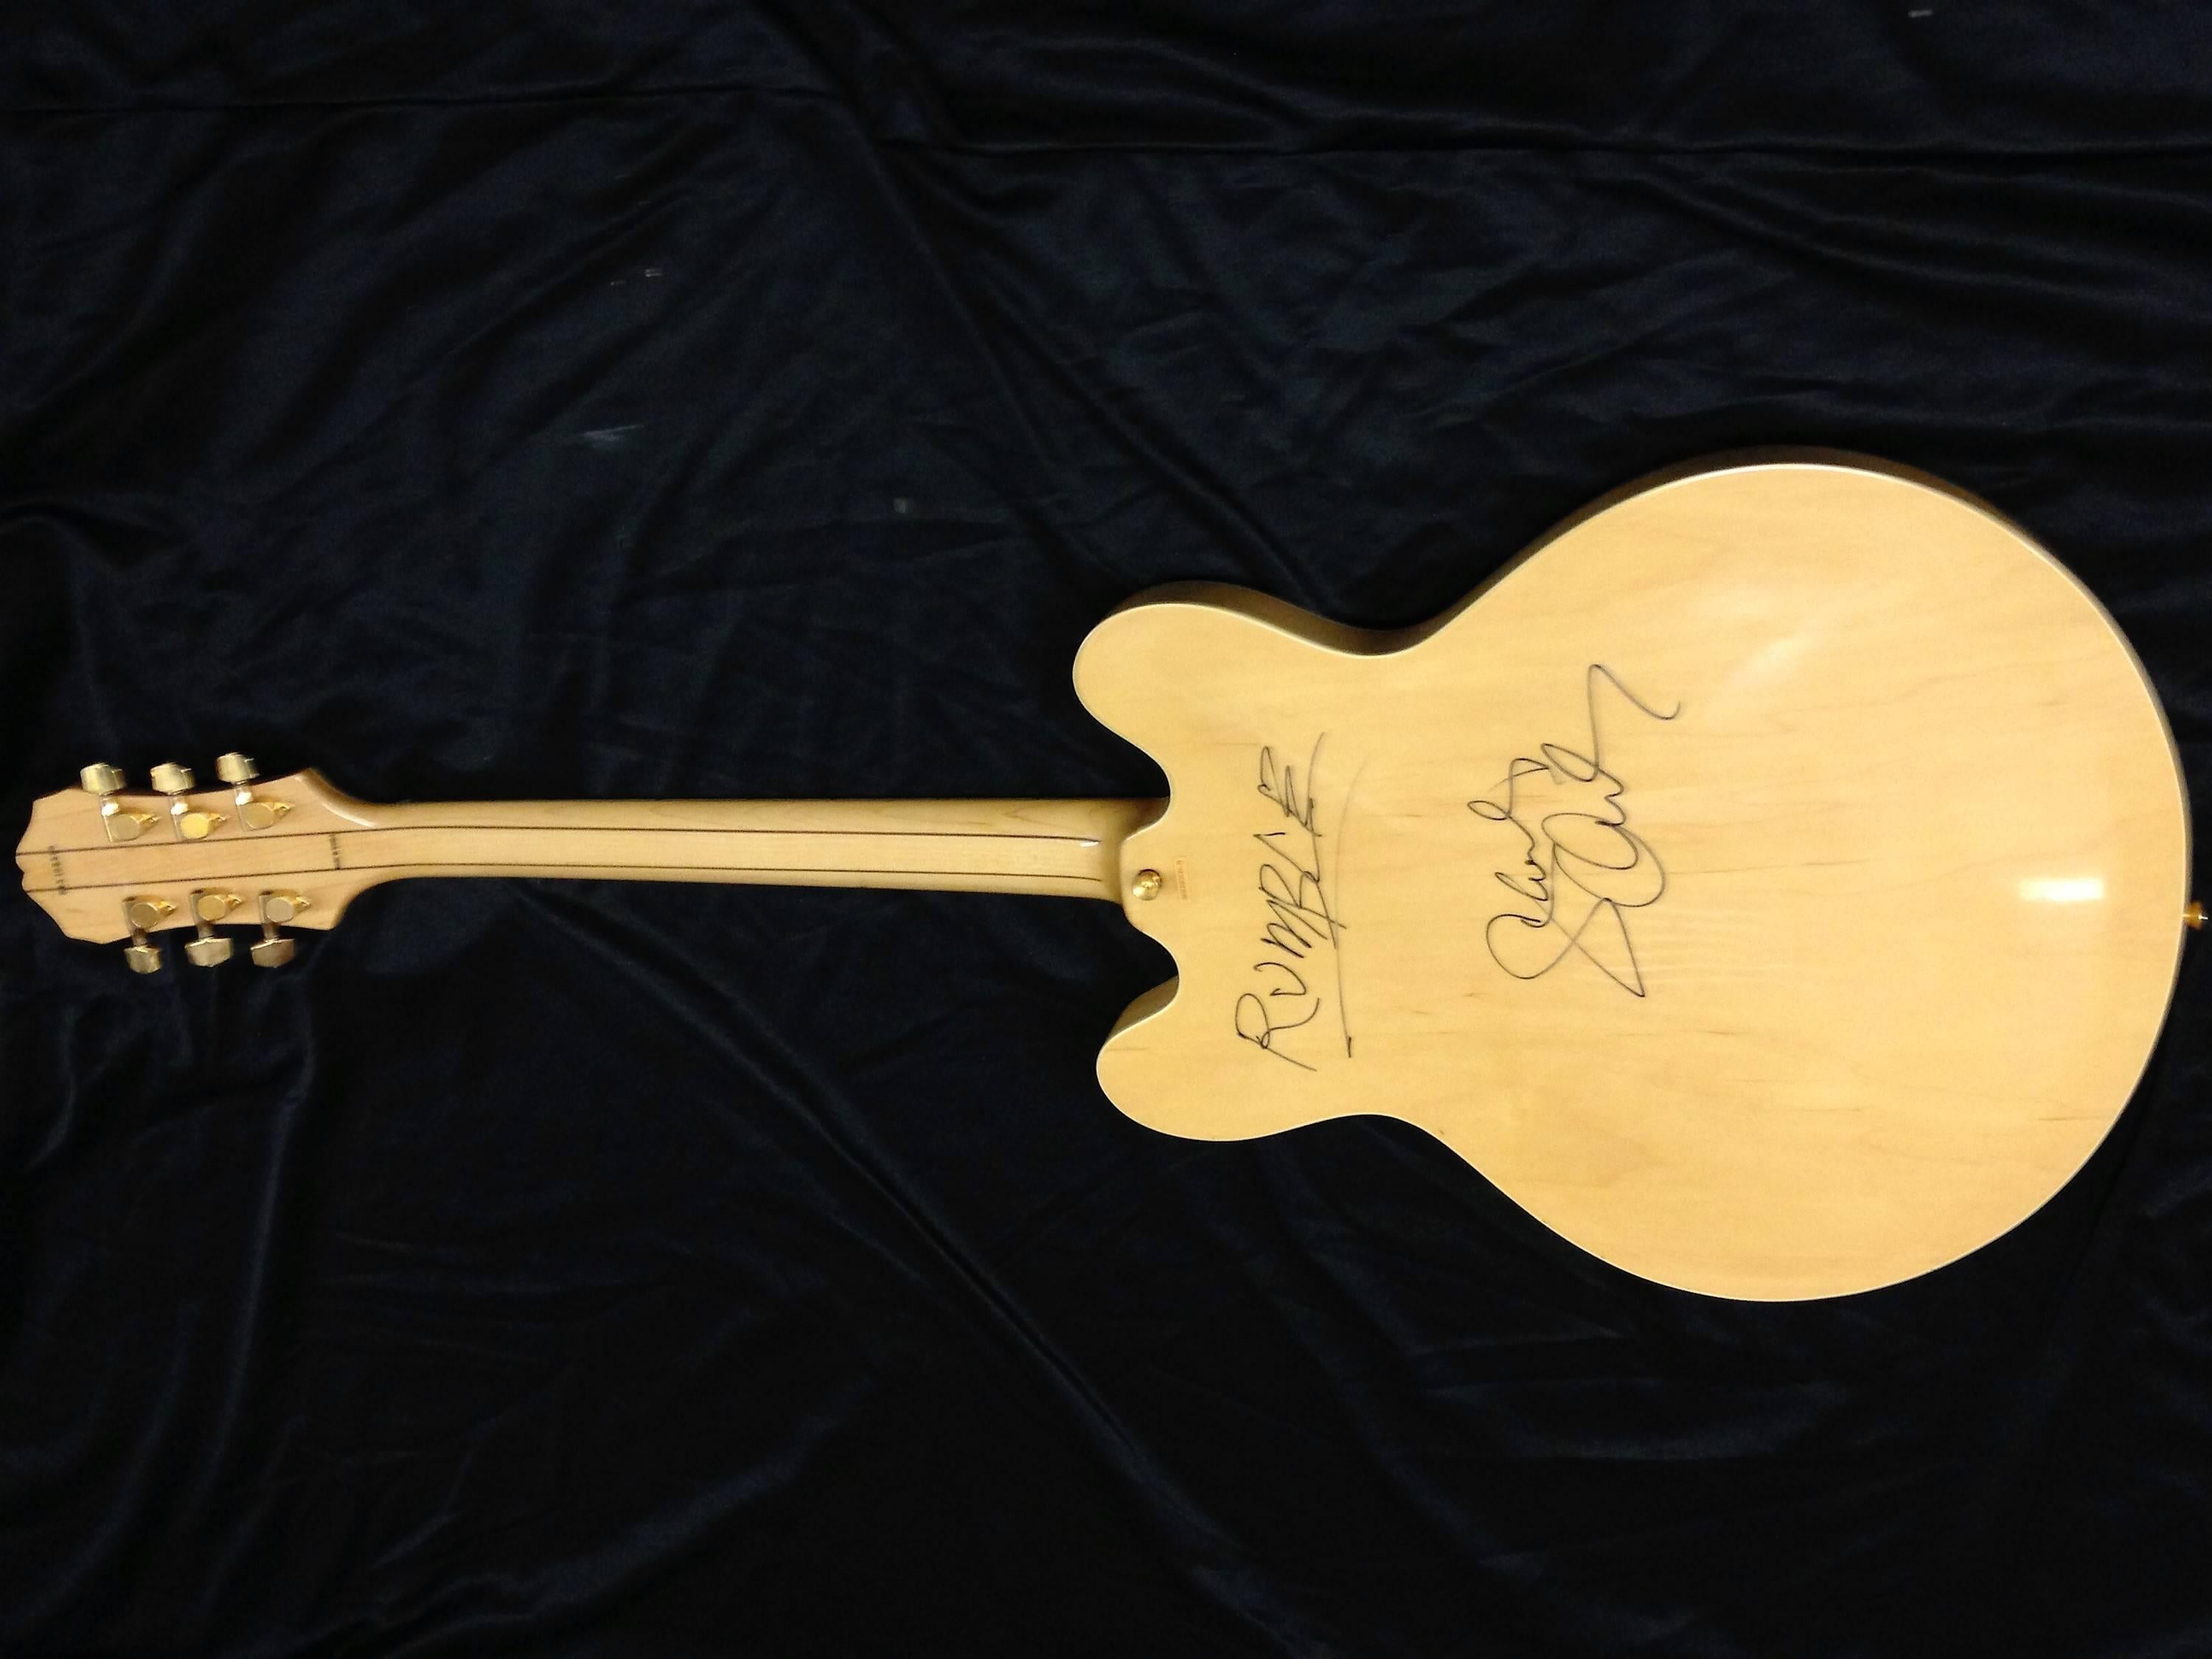 This Epiphone Sheraton guitar is signed by BB King, John McLaughlin, George Benson, Carlos Santana, Les Paul, JJ Cale, Link Wray Scotty Moore, Lonnie Mack, Chet Atkins, Alvin Lee and Bo Diddly. The back of the guitar is also signed by Stanley Clarke